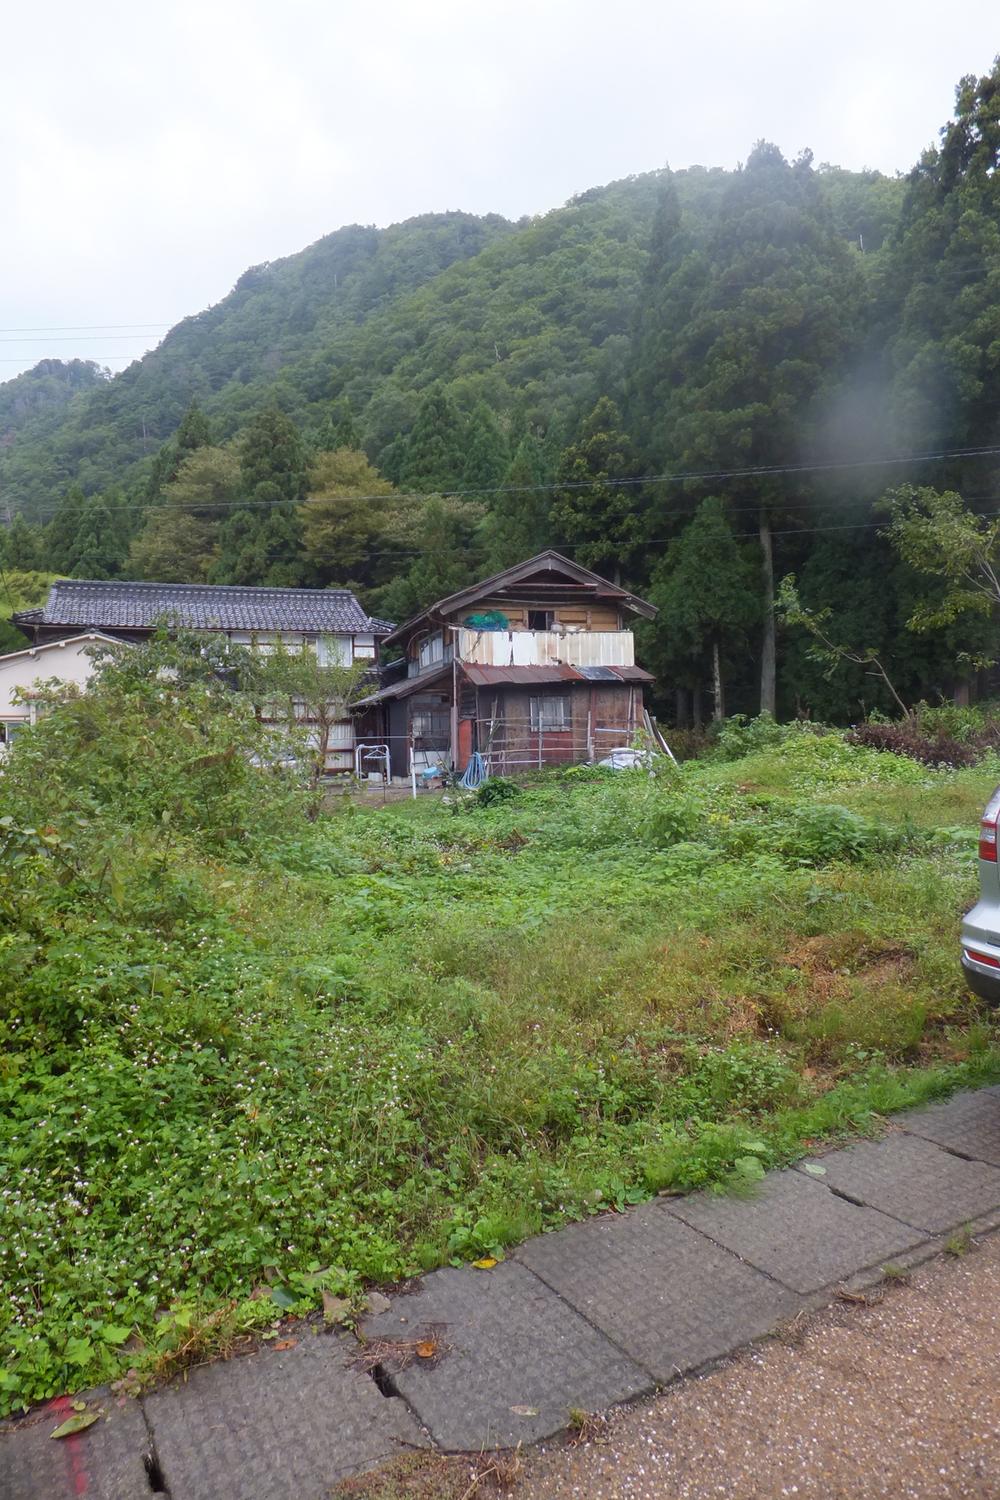 Local land photo. Behind is Unryusan